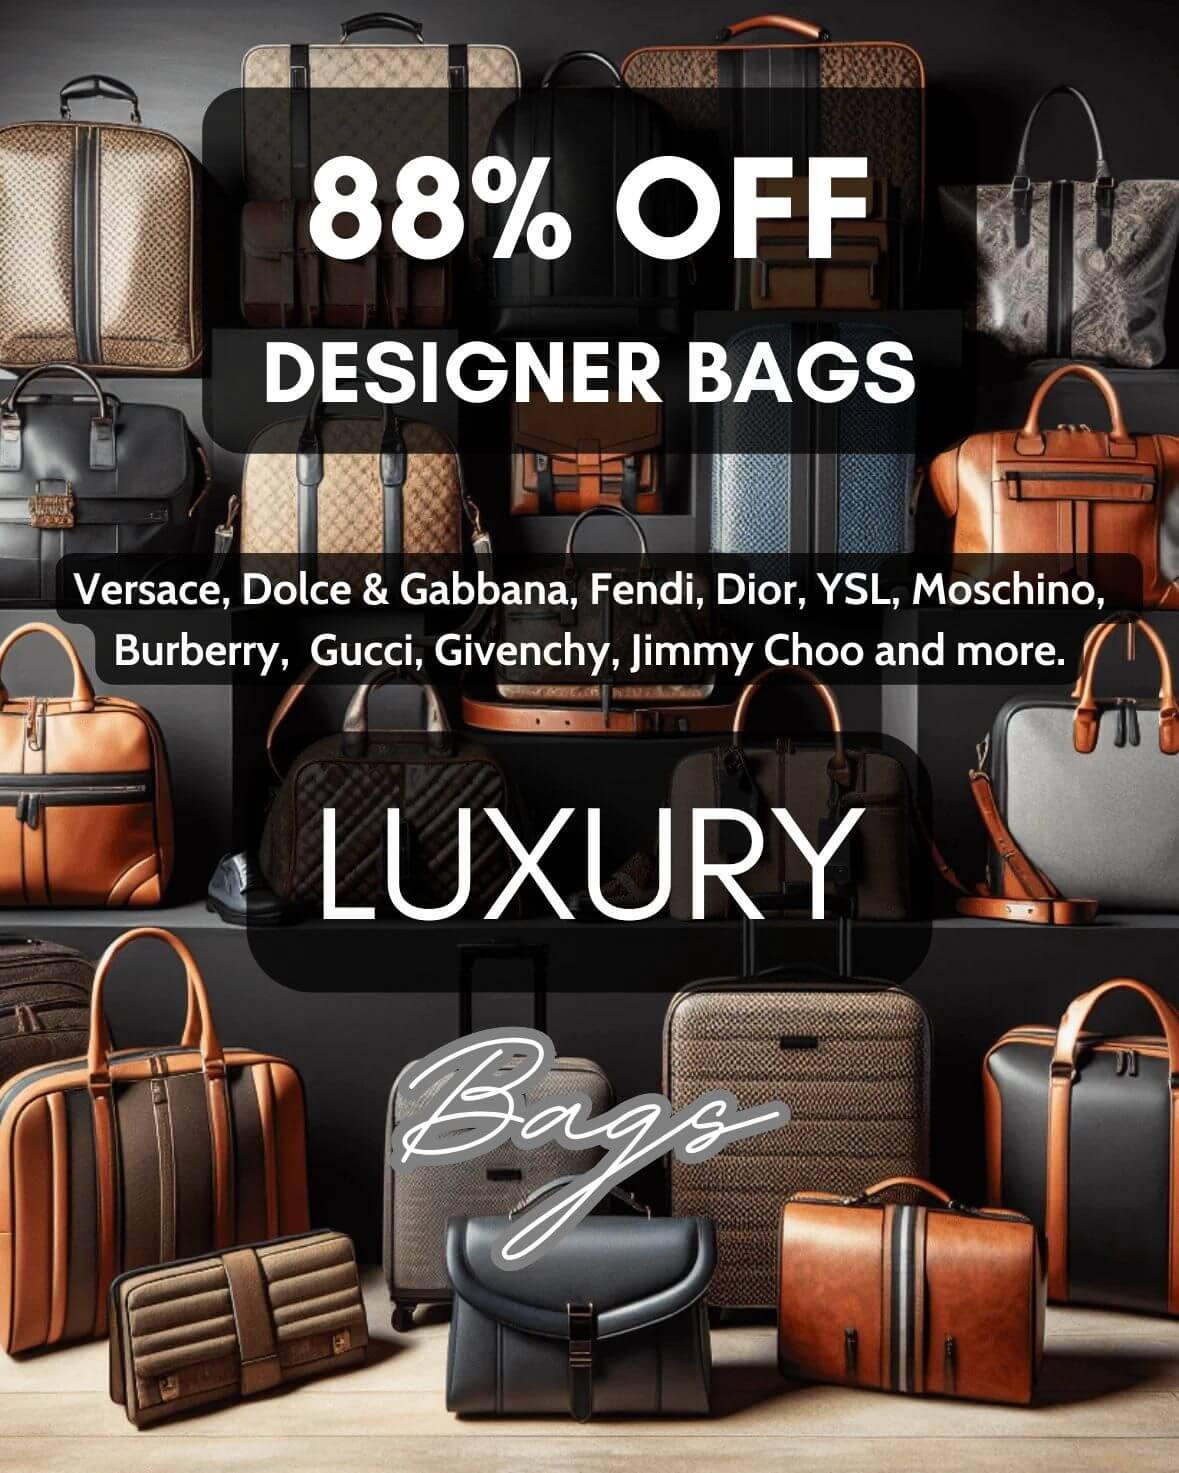 authentic designer bags from authorized dealers worldwide | Murillo Merchandise 